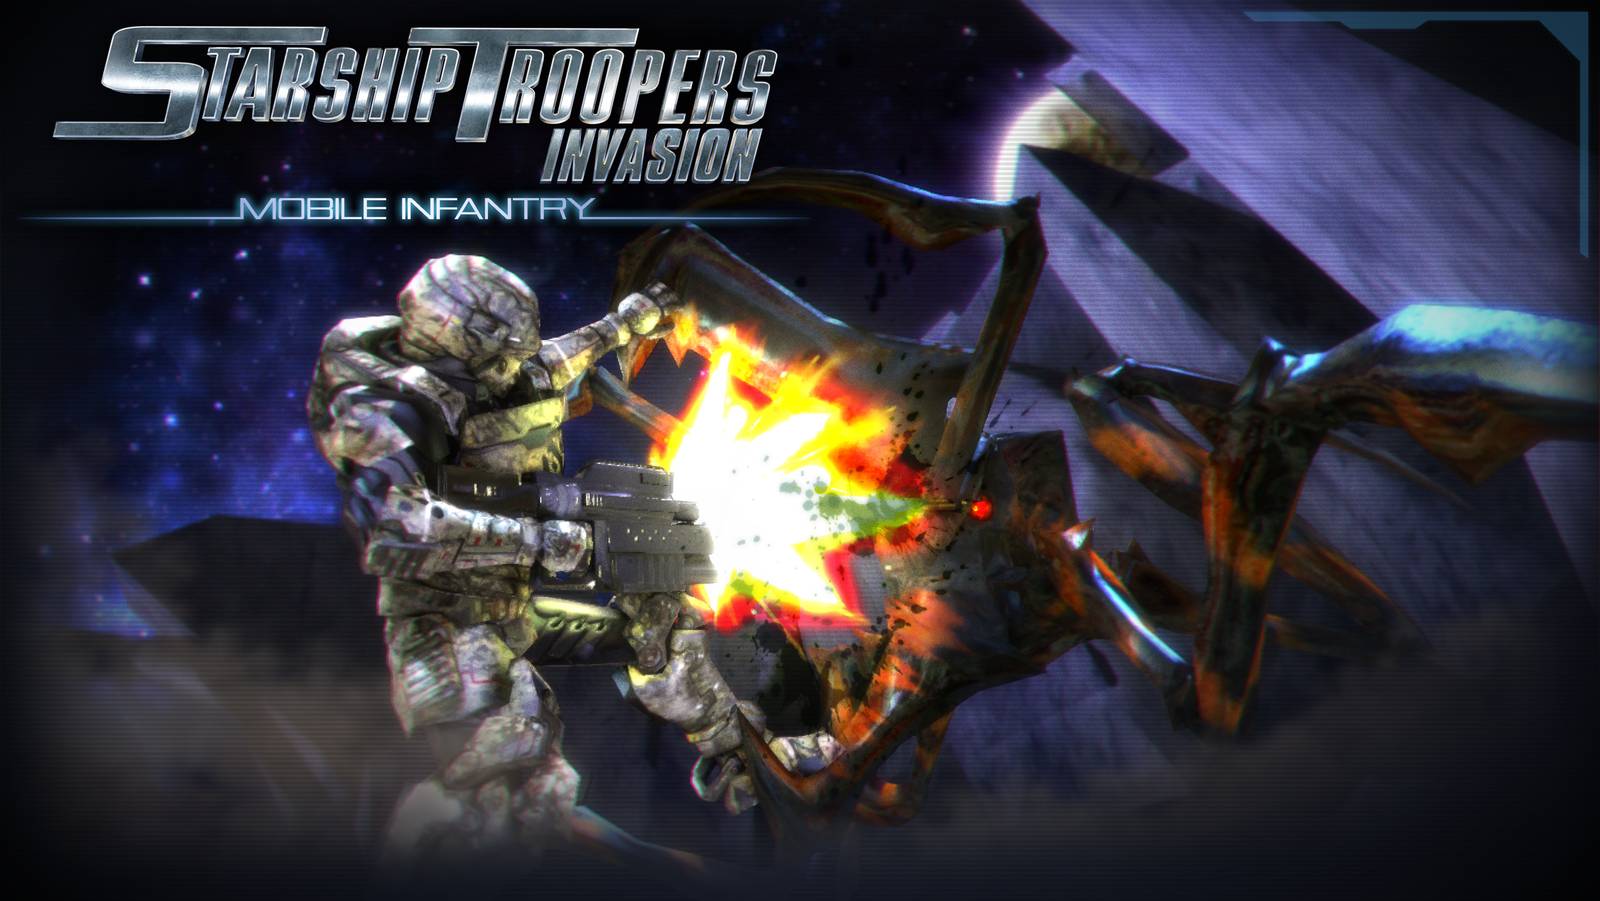 Starship Troopers Invasion Wallpaper For